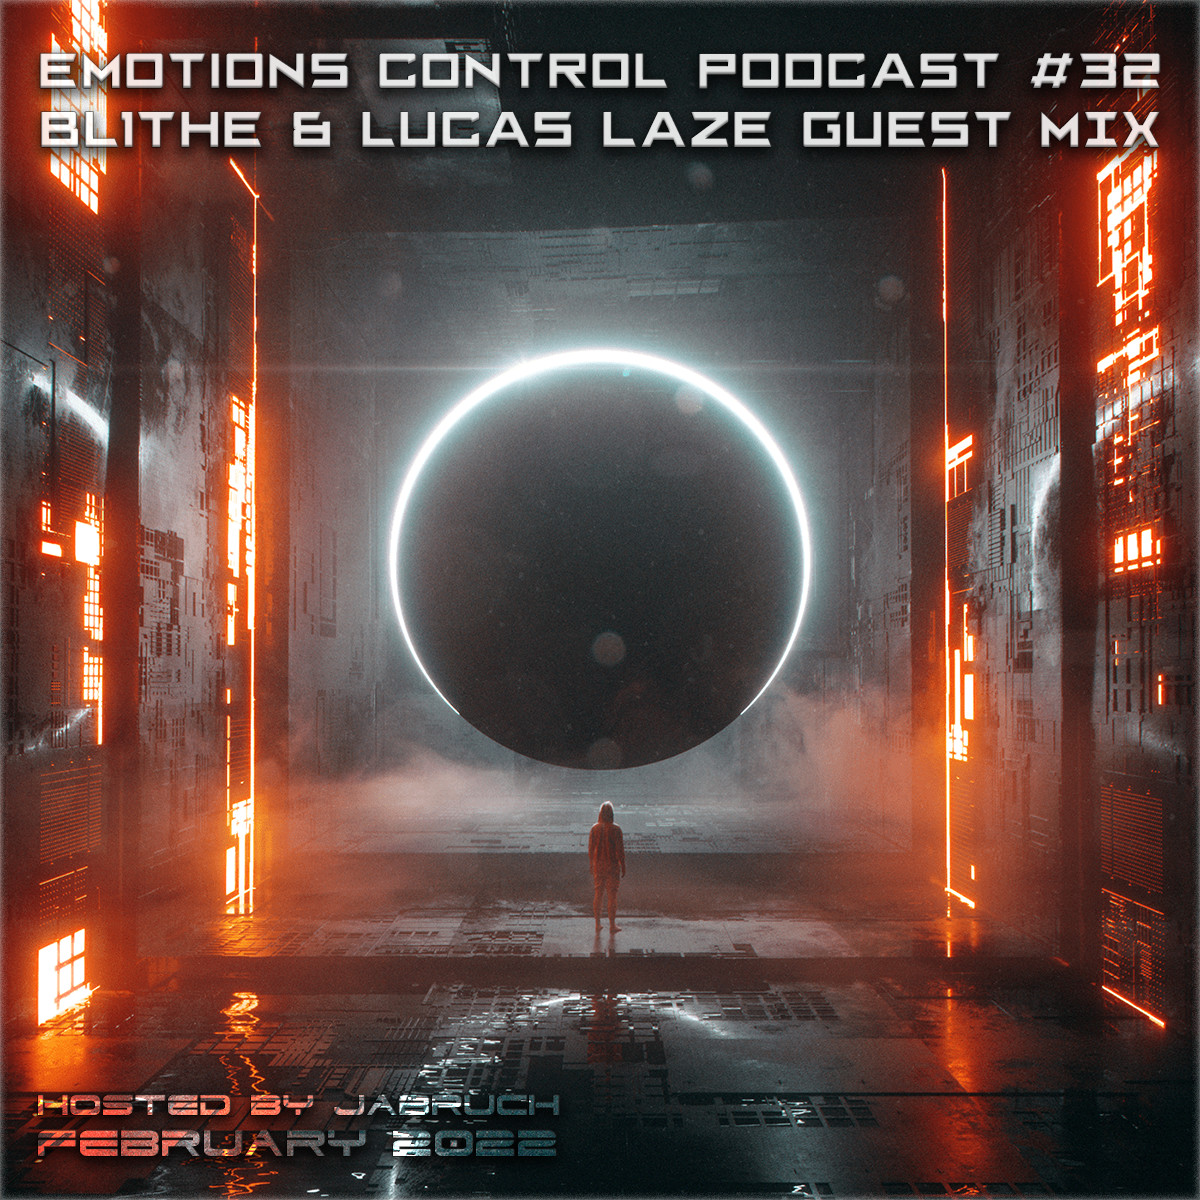 Emotions Control Podcast #32 BL1THE & Lucas Laze Guest Mix [February 2022] #32